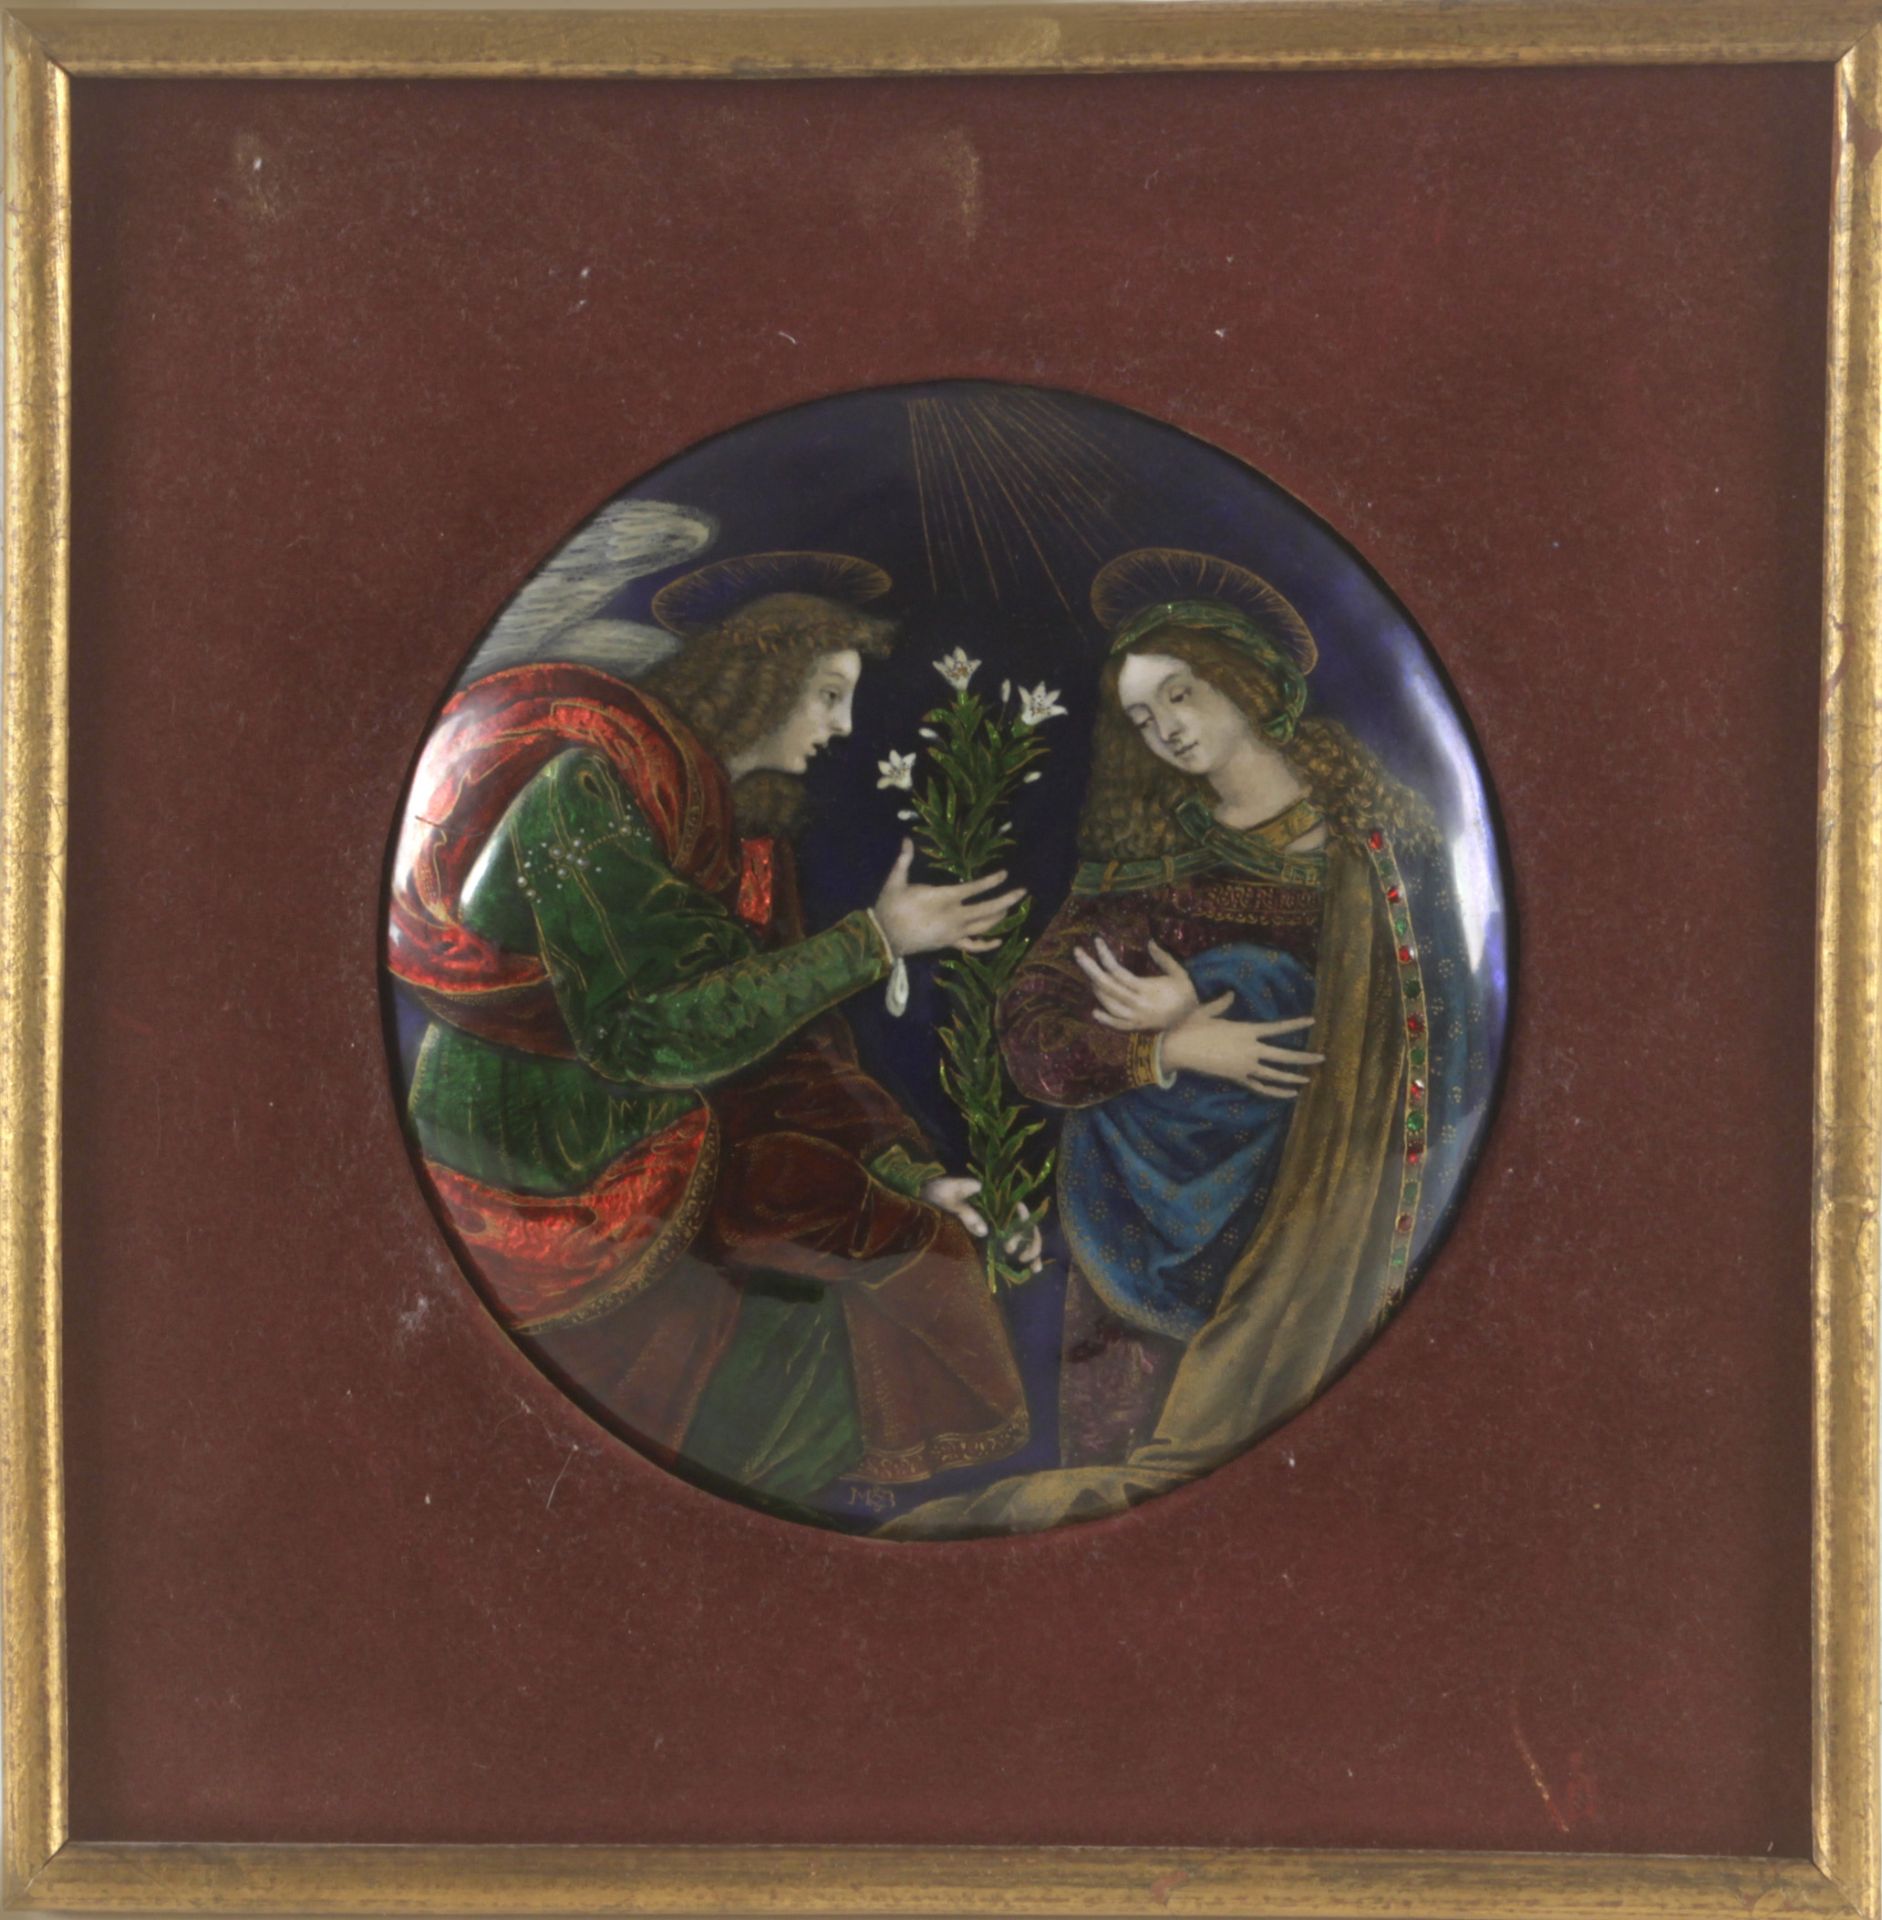 A 19th century devotional plaque in Limoges enamel - Image 2 of 2